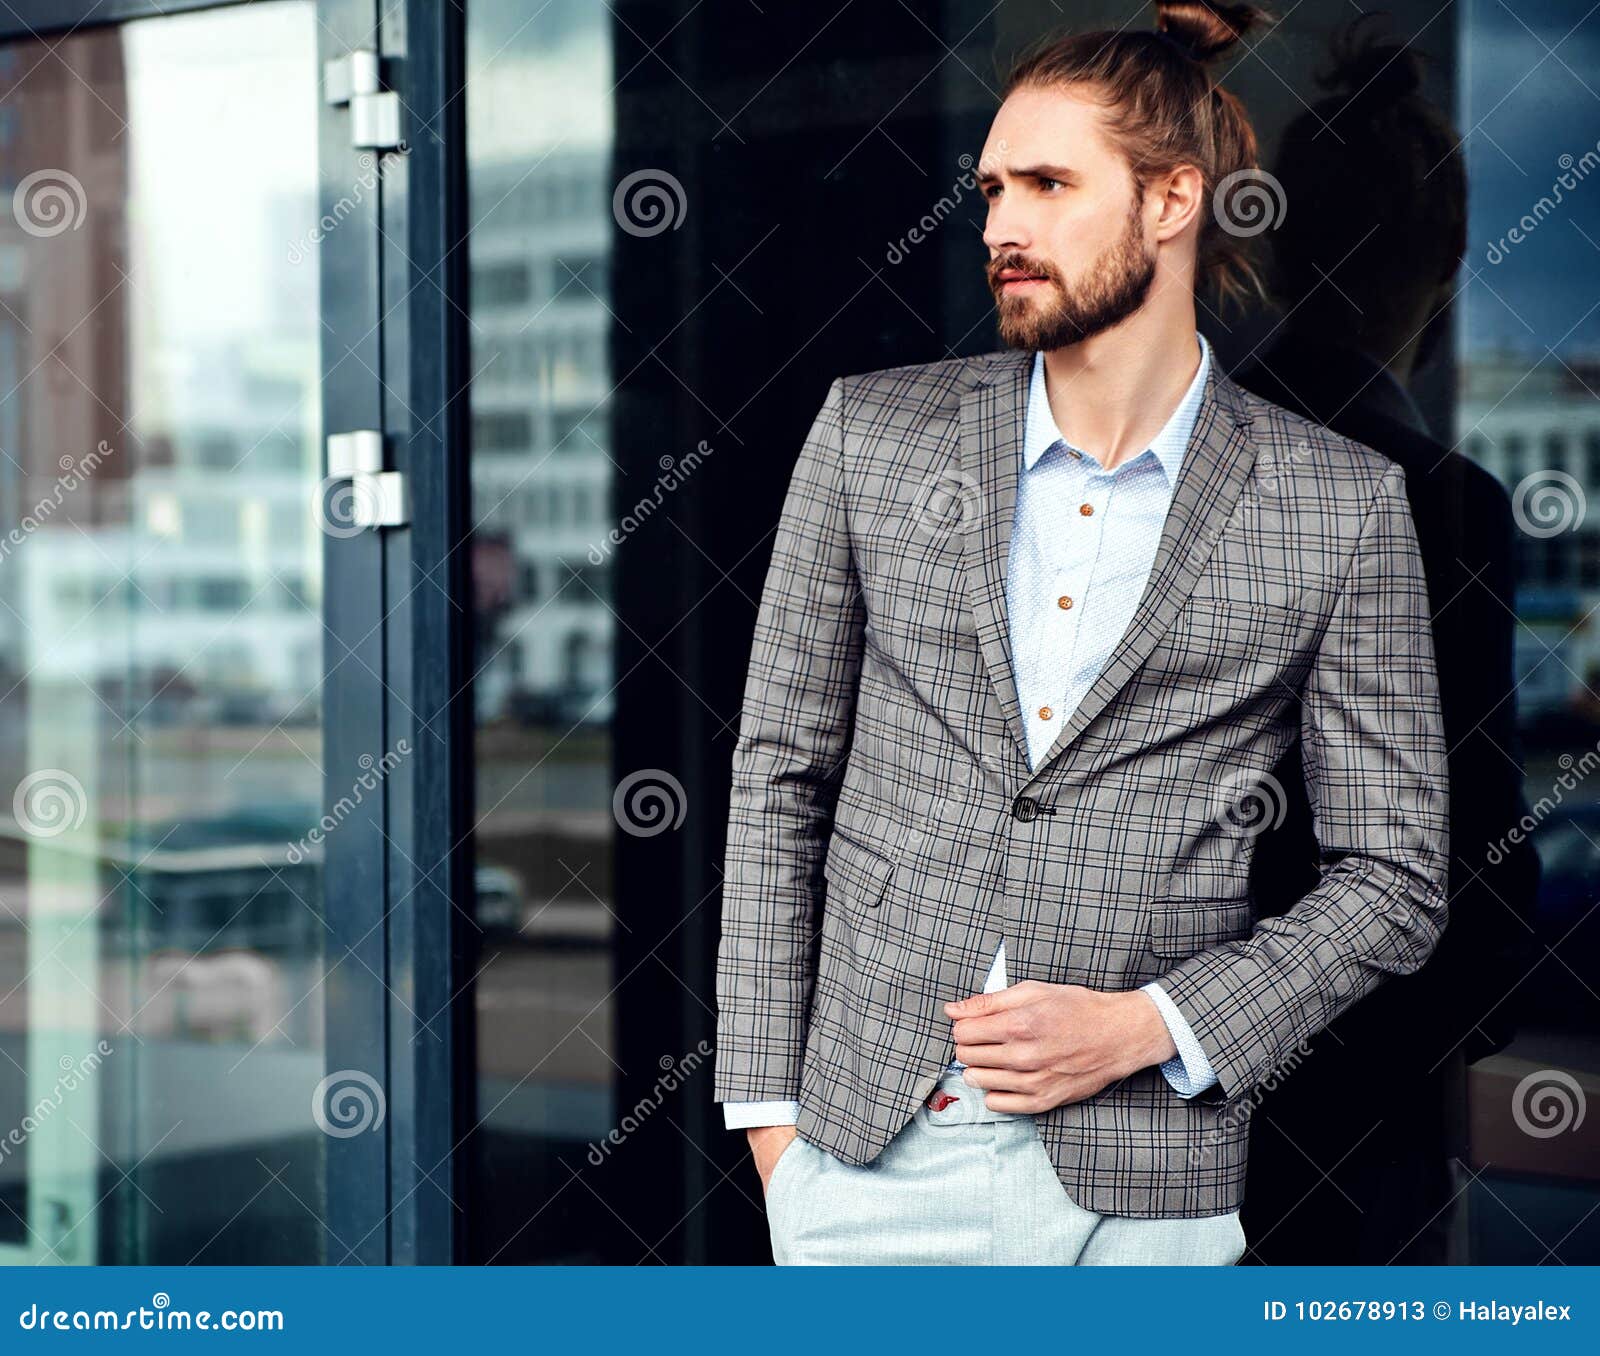 Young Male Model Posing in Studio Stock Image - Image of clothing, people:  90361977